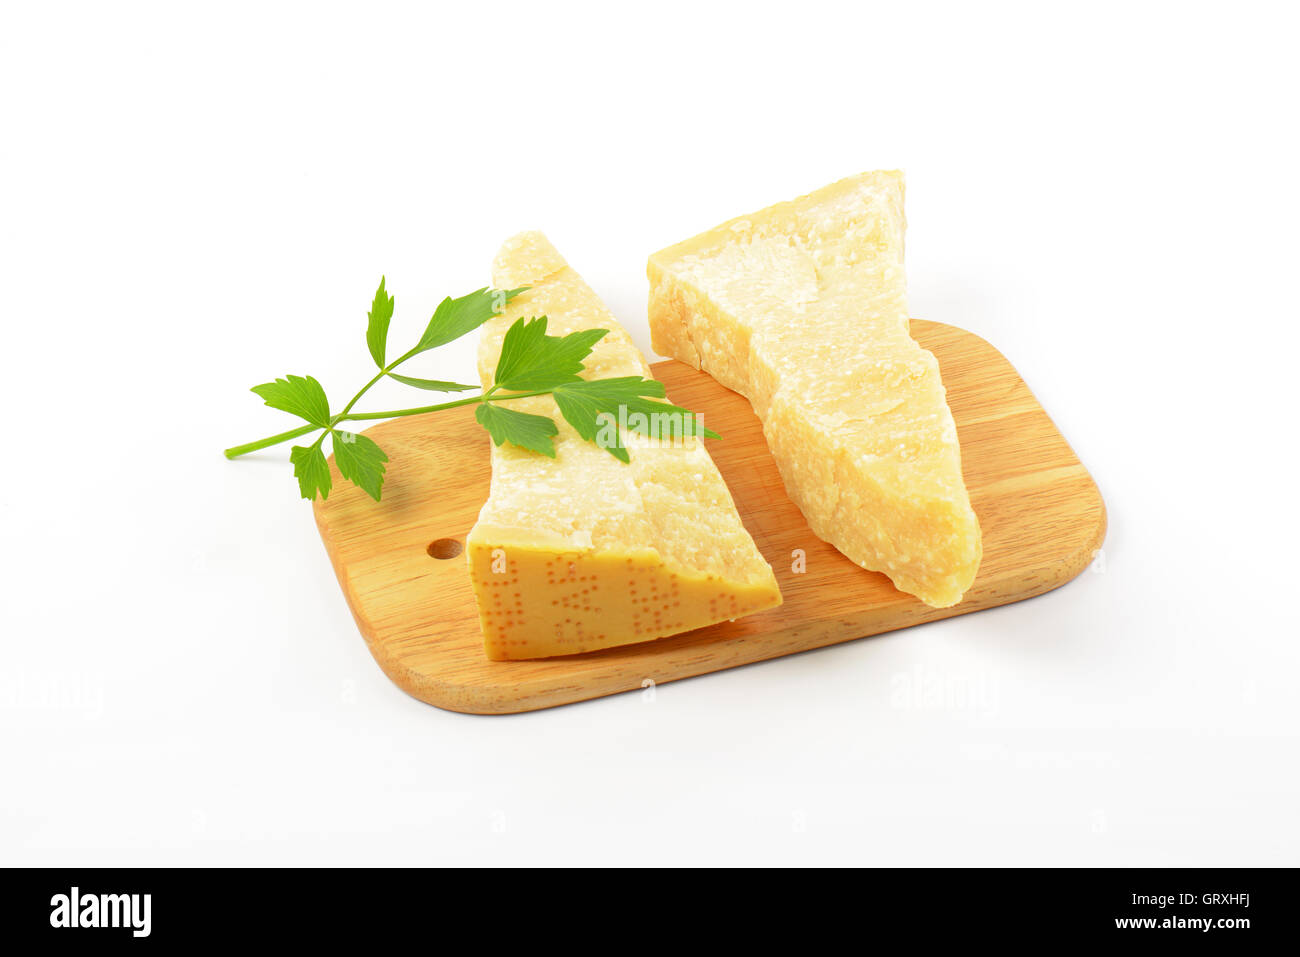 Two wedges of true Parmesan cheese on cutting board Stock Photo